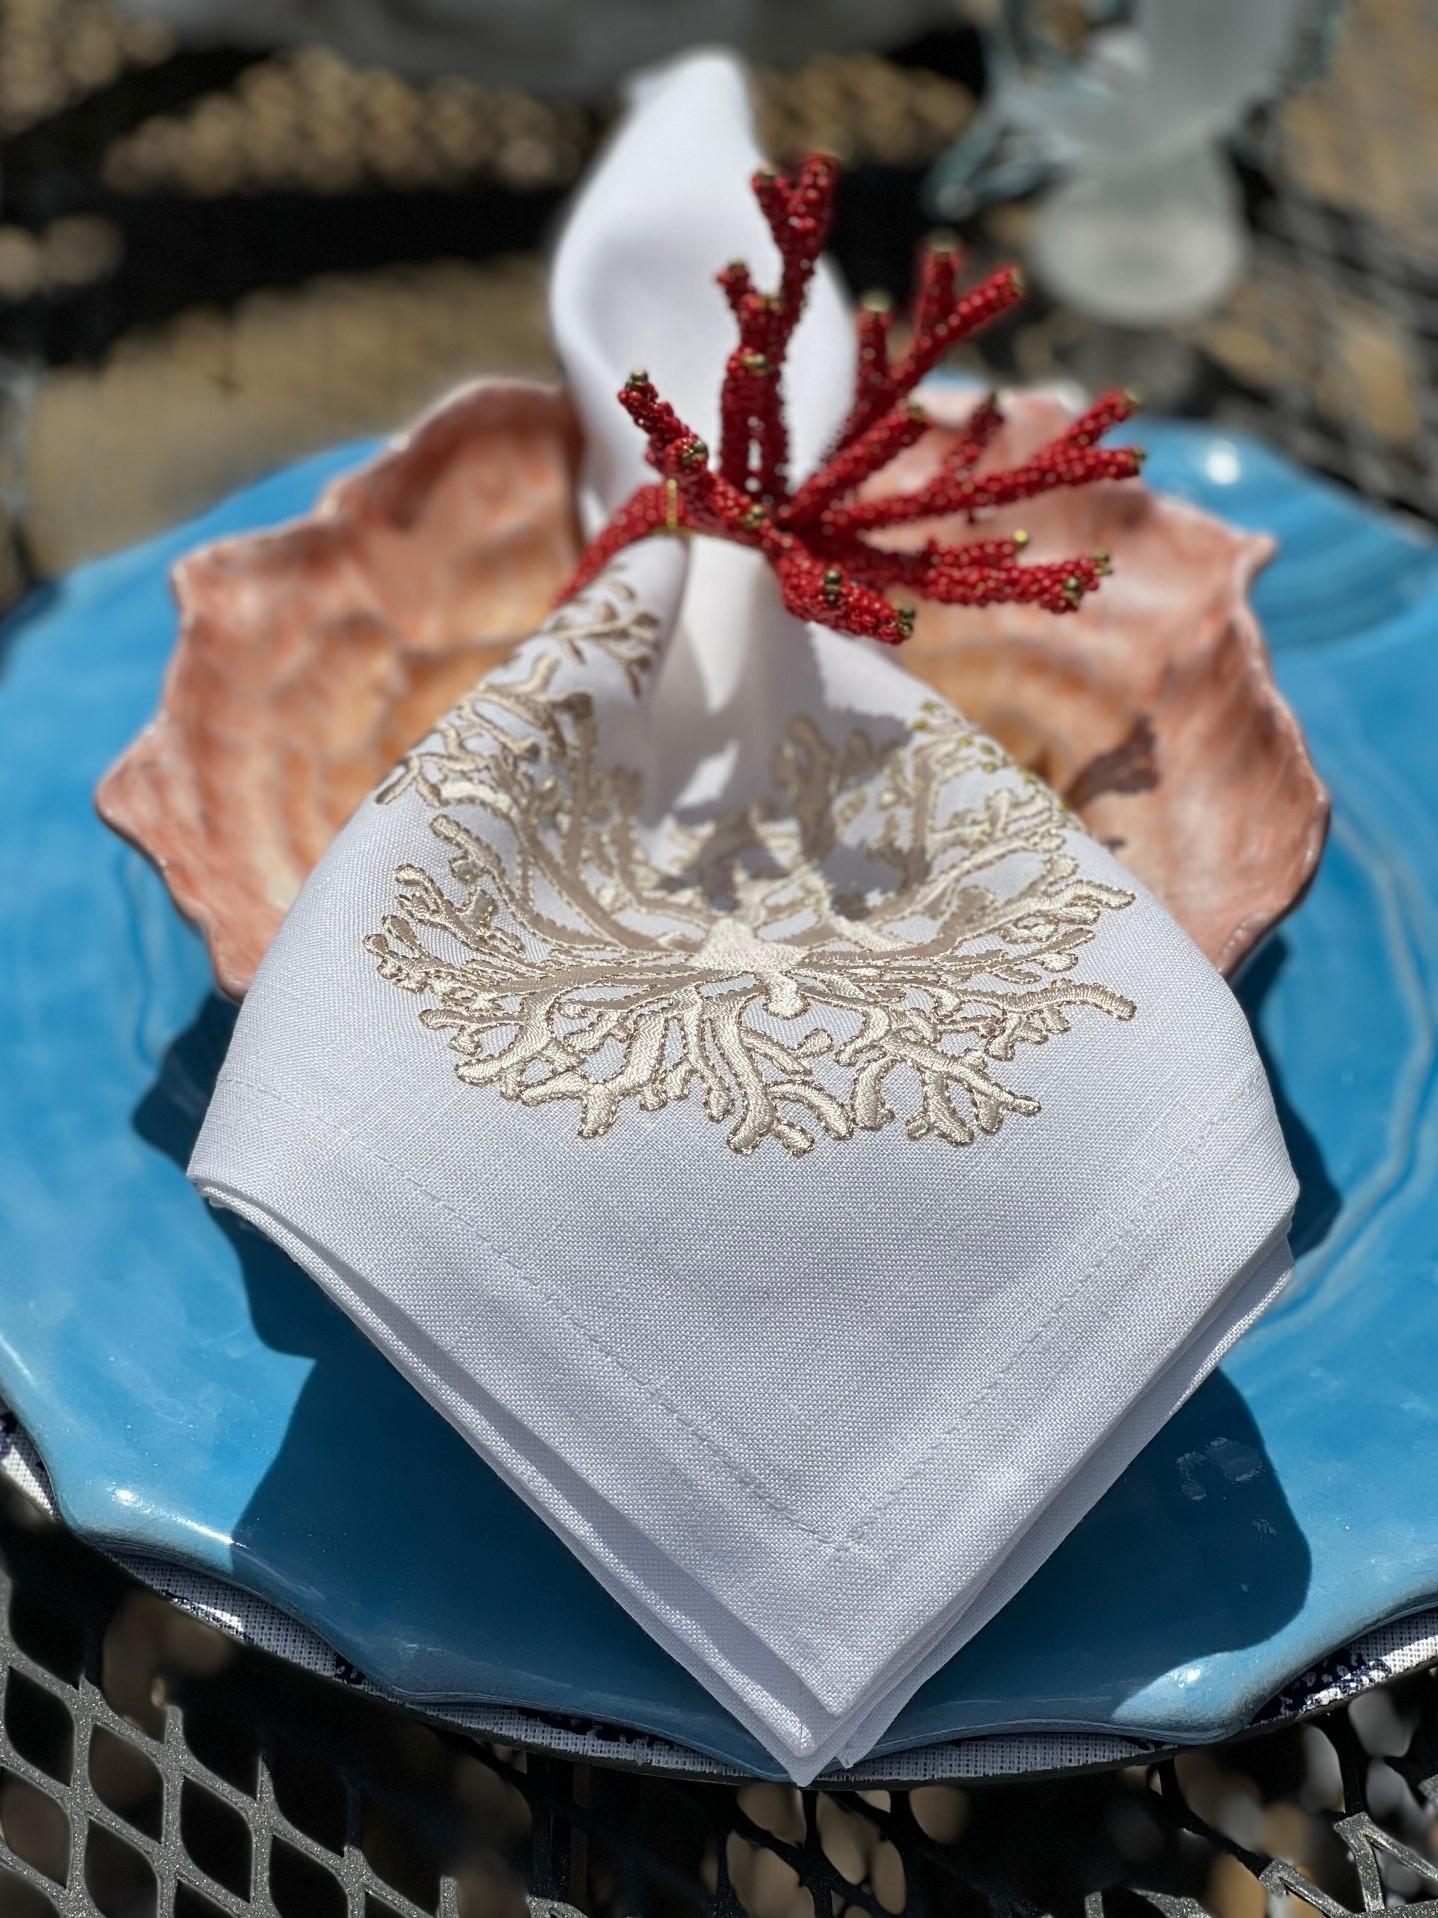 Inspired by the wonders of the sea, these beautiful Kim Seybert napkins showcase hand-drawn coral designs embroidered on a crisp white linen napkin. The embroidery comprises four different techniques; running, back, satin and French knot. Five